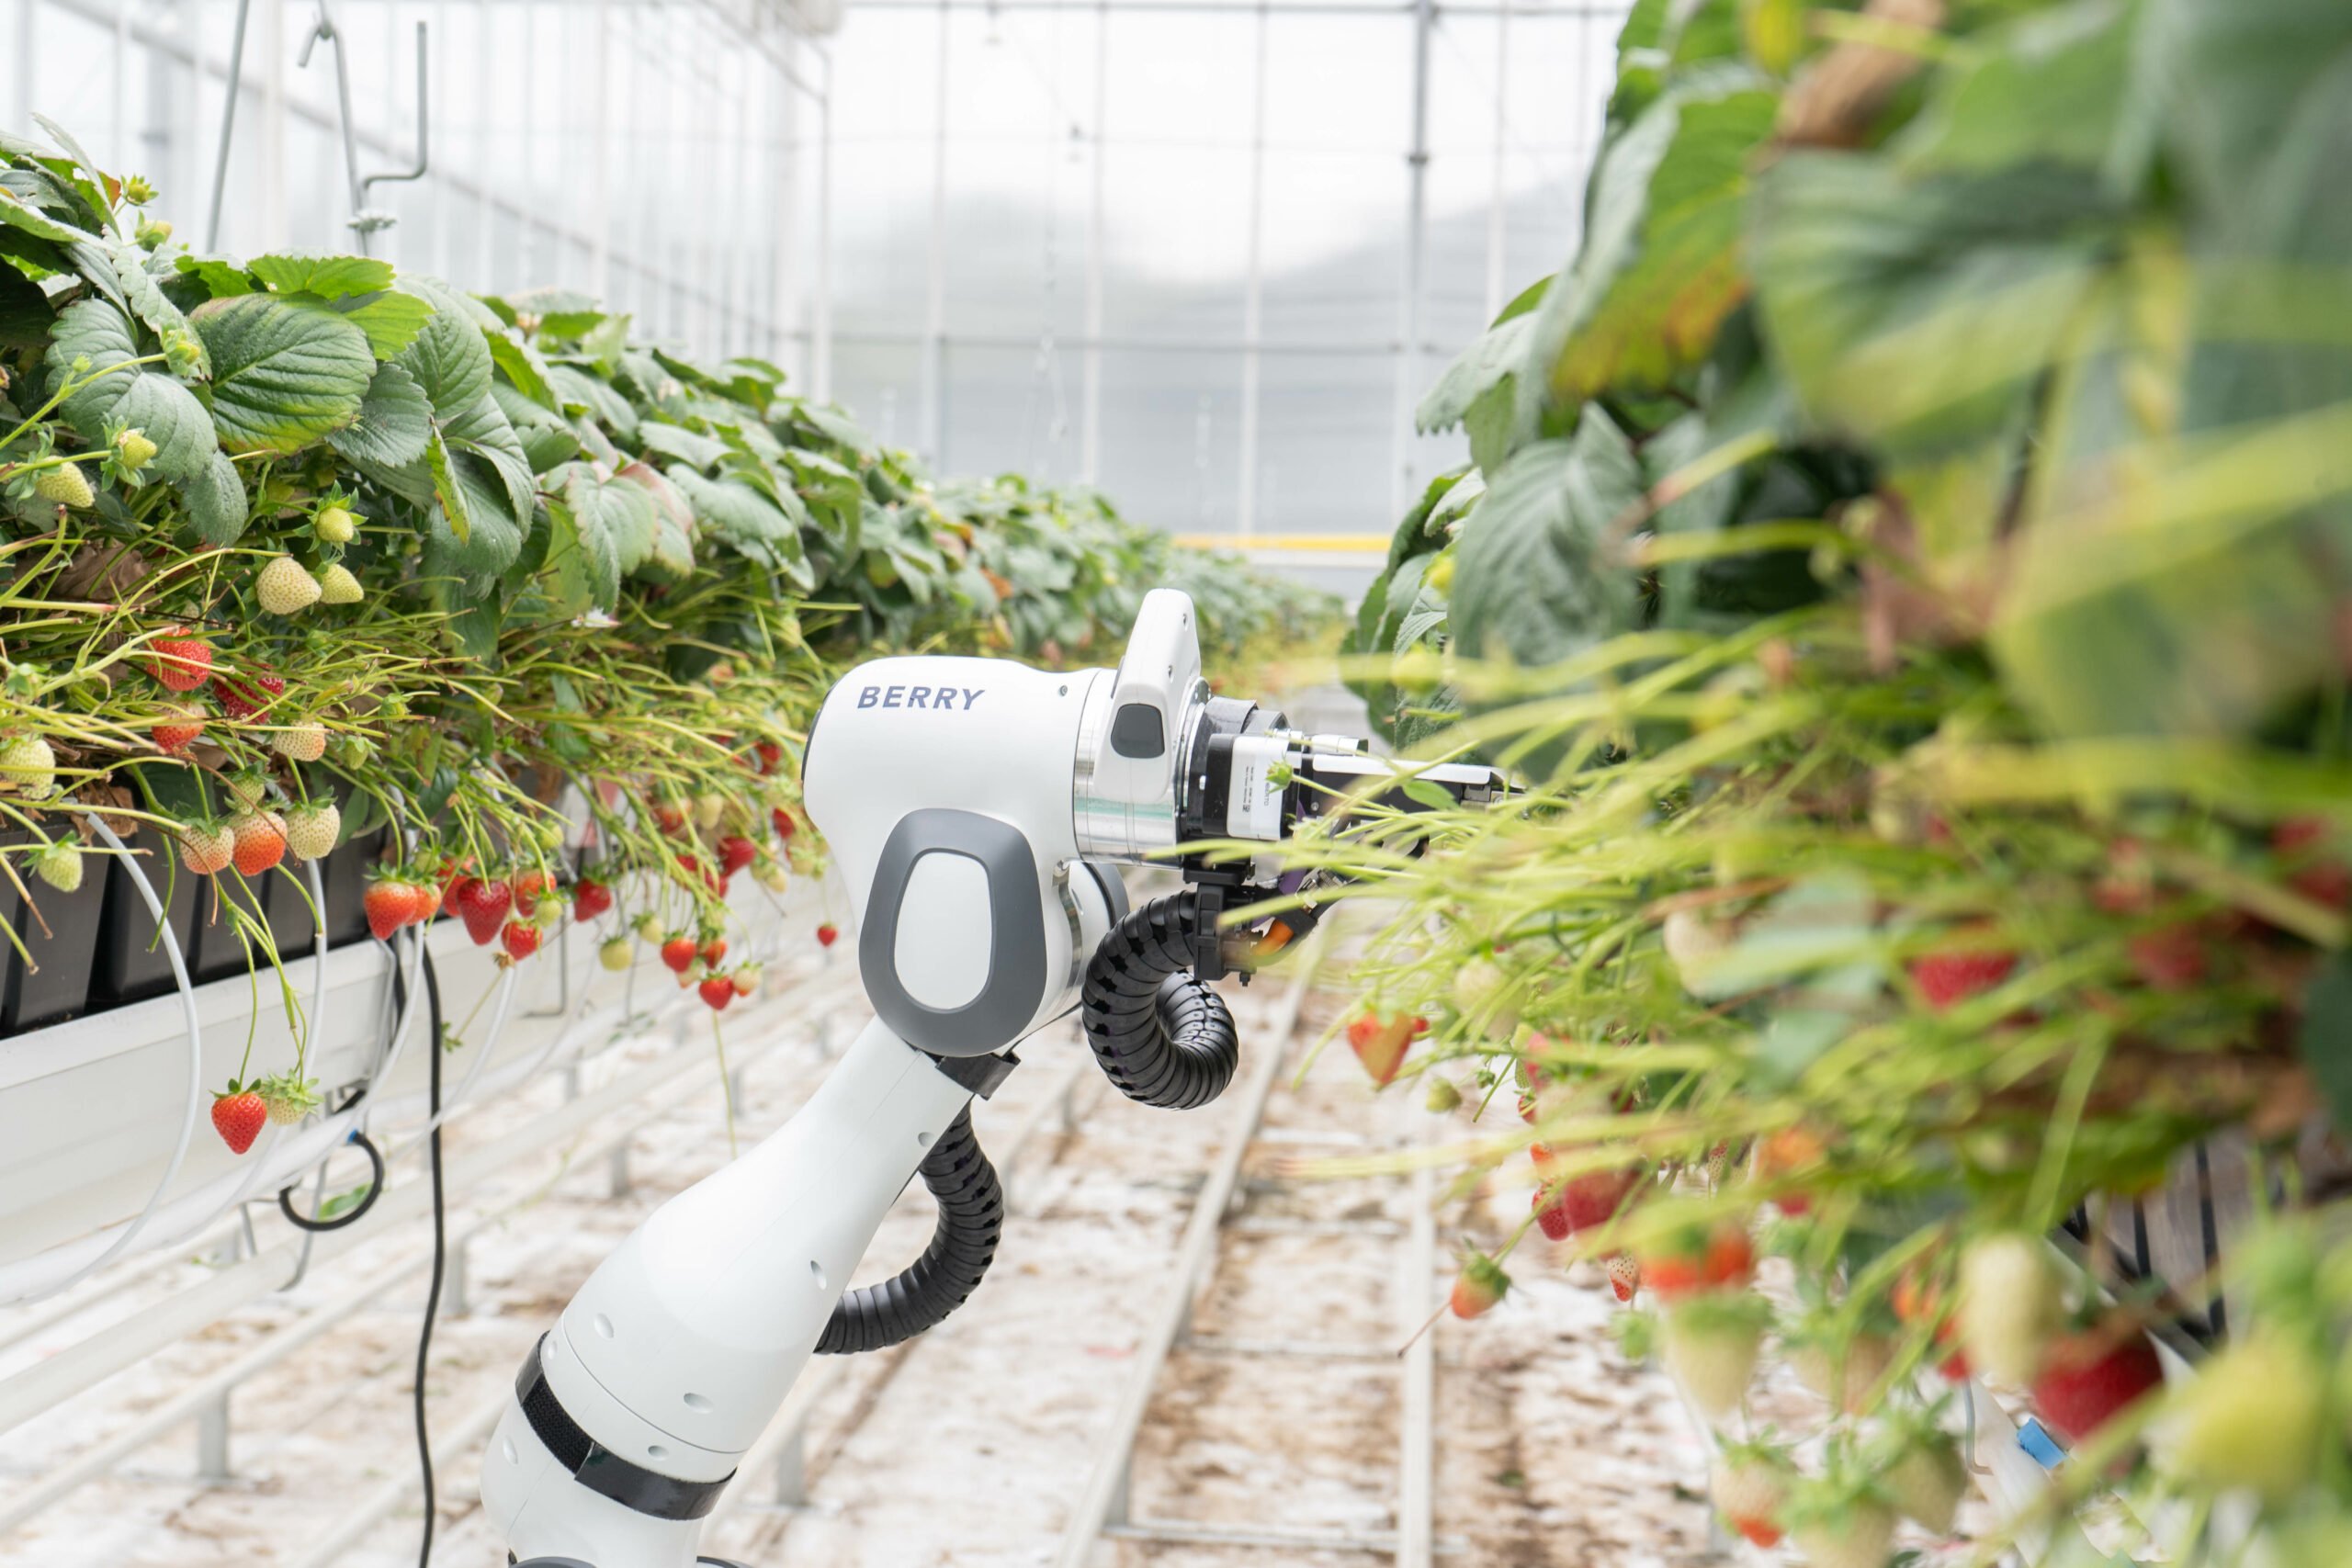 What started as a hackathon team, grew into BERRY, an automated picking robot